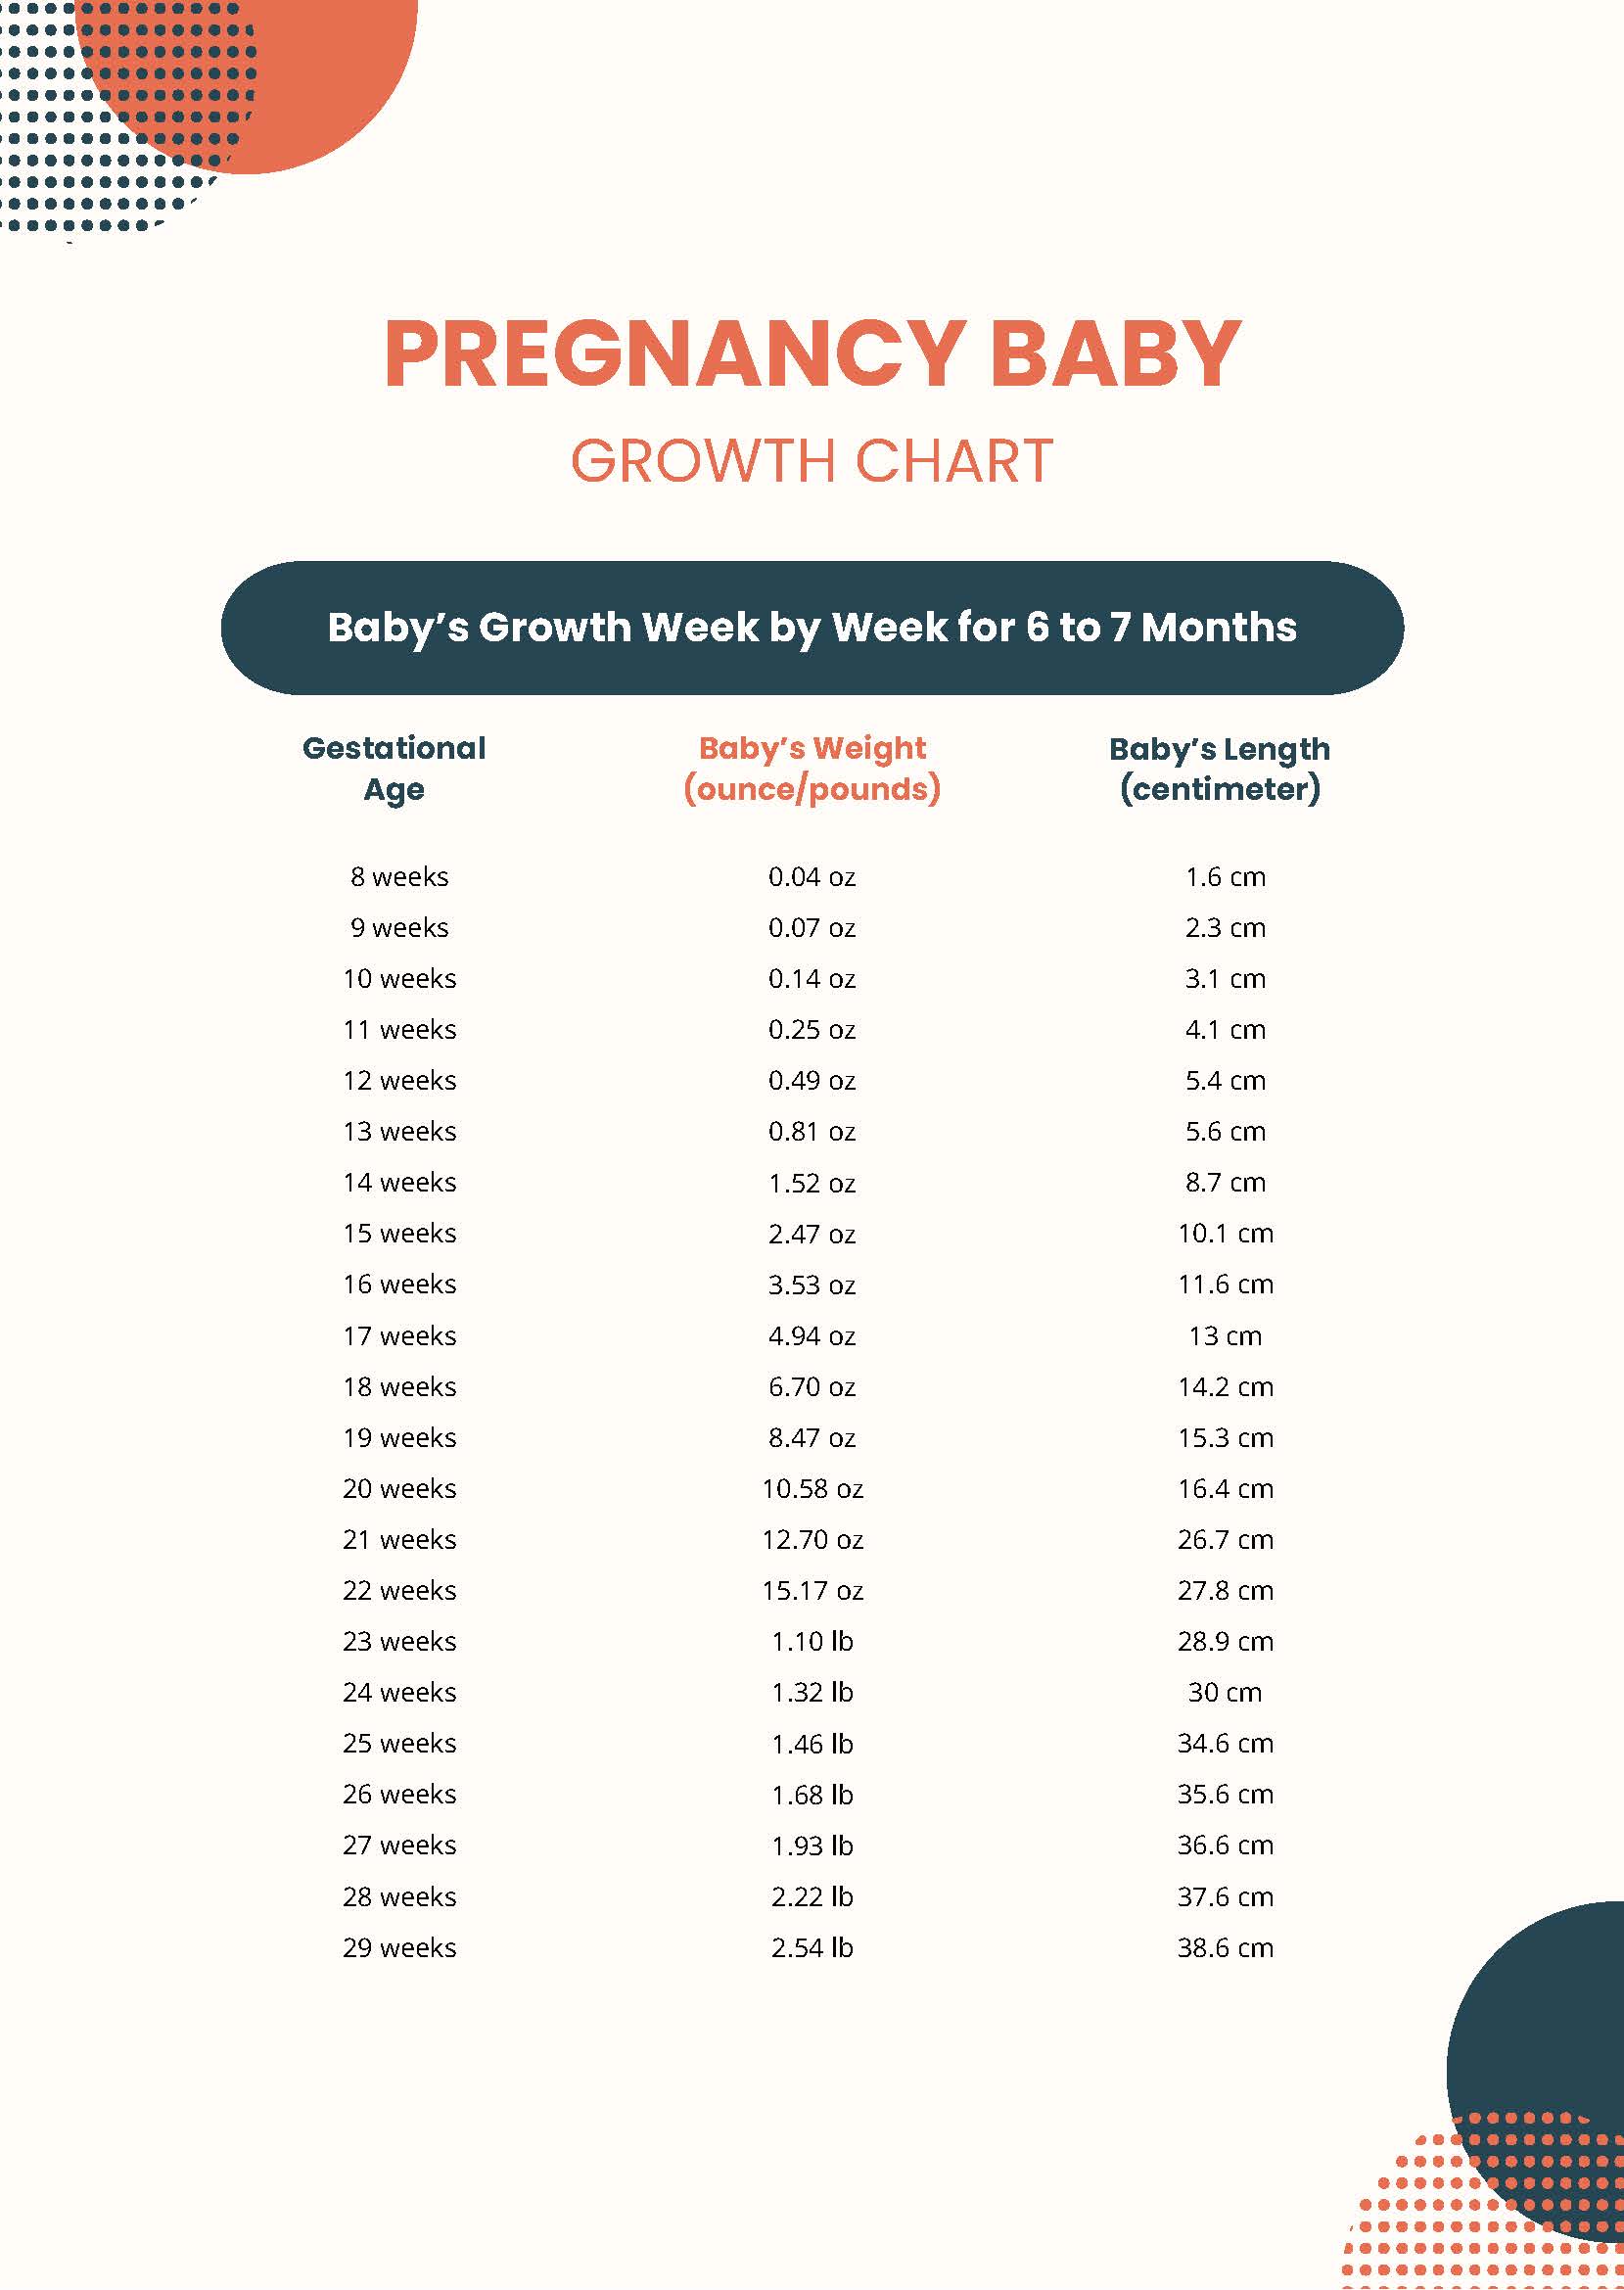 Pregnancy Baby Growth Chart in PDF